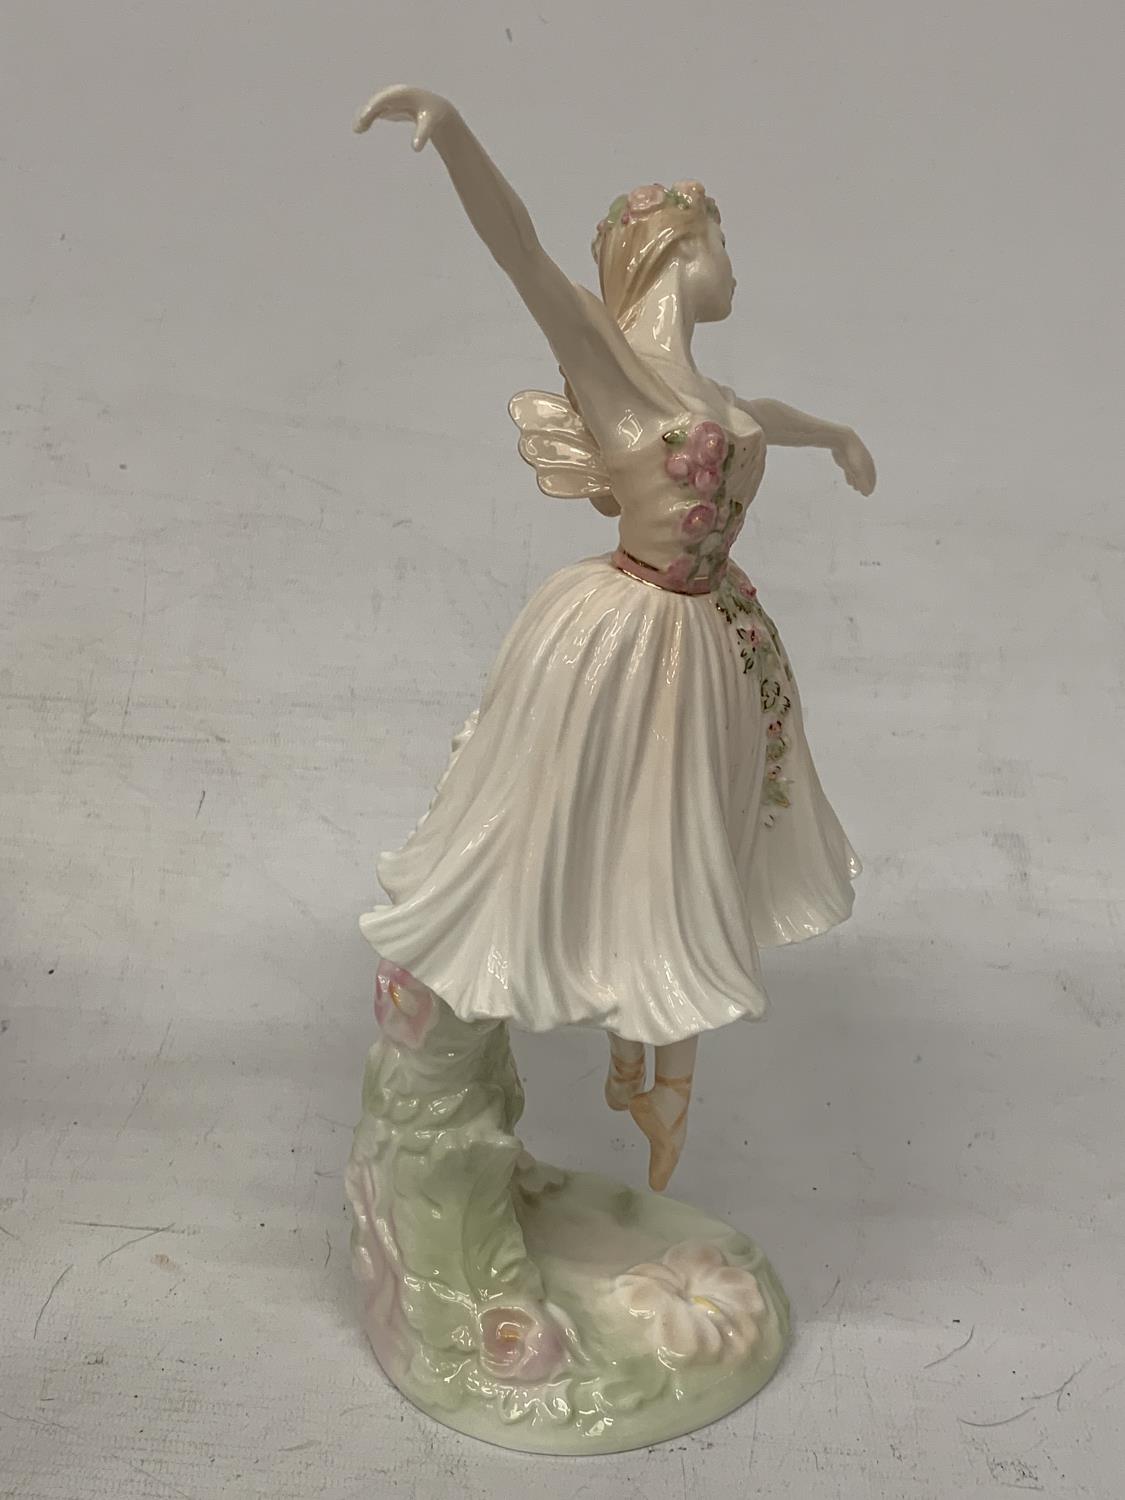 A COALPORT FIGURINE "DAME ANTOINETTE SIBLEY" FROM THE ROYAL ACADEMY OF DANCING COLLECTION - Image 4 of 5